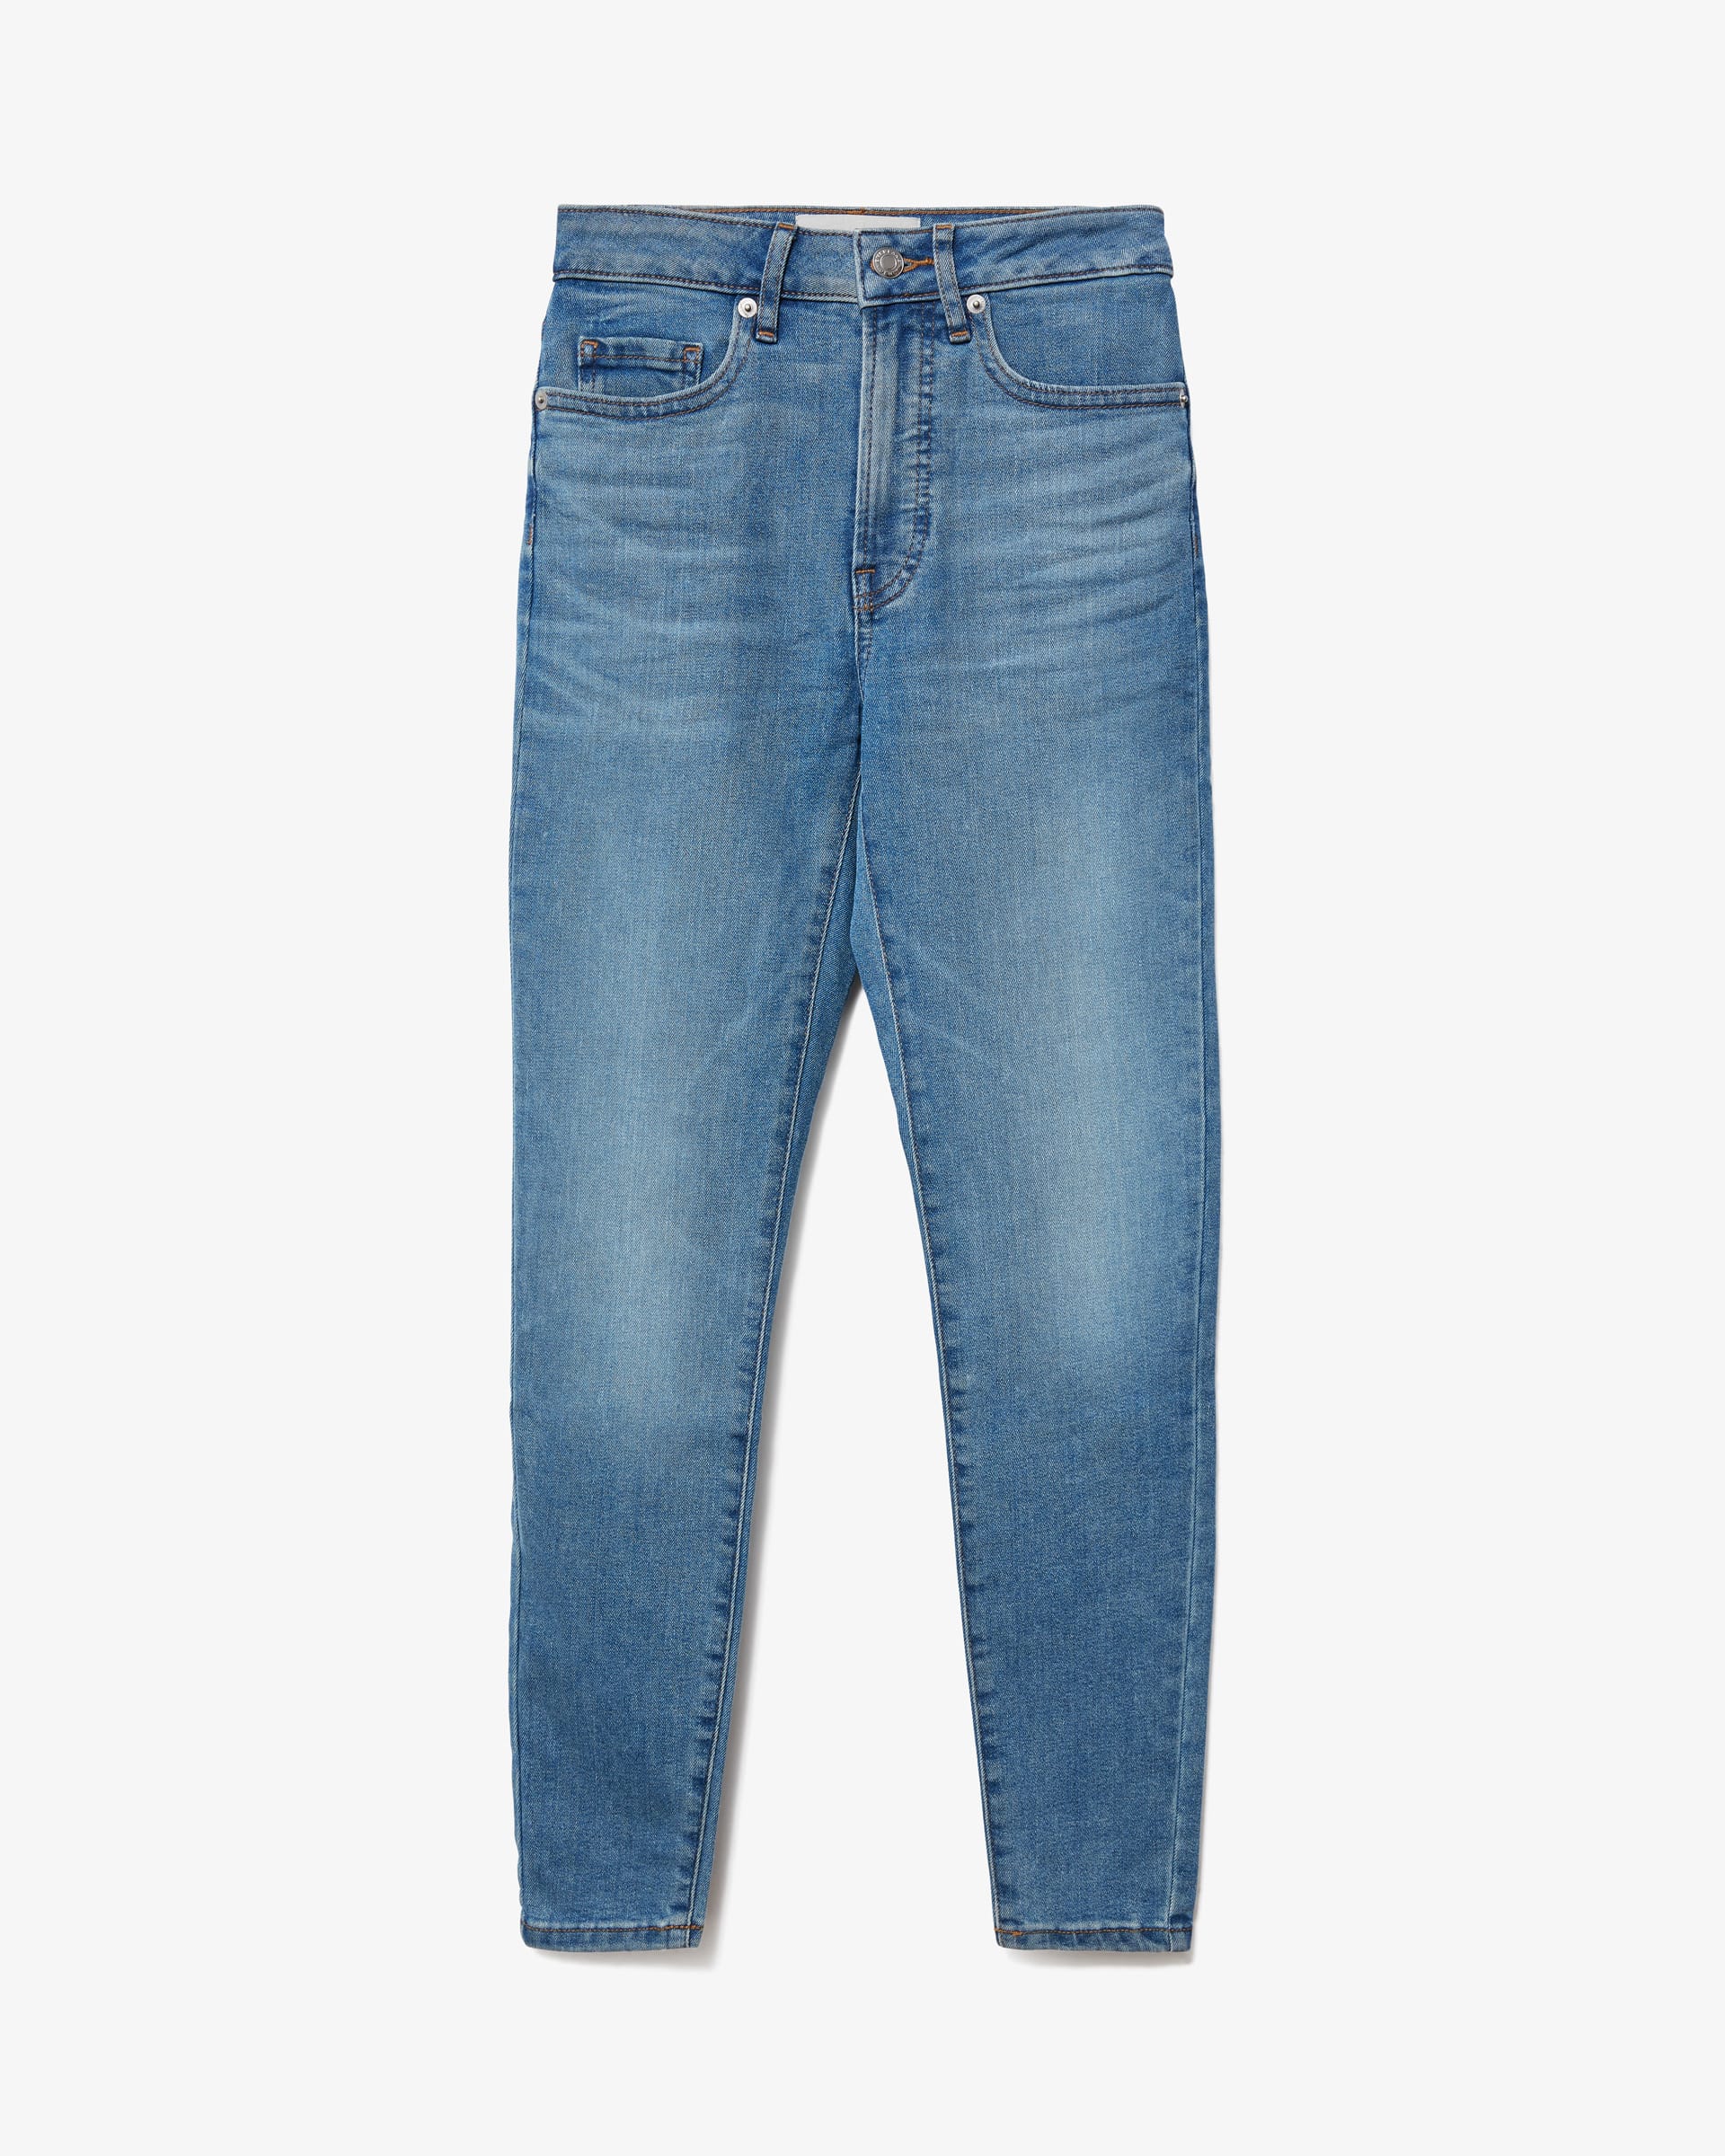 The Curvy Authentic Stretch High-Rise Skinny Jean Vintage Blue – Everlane